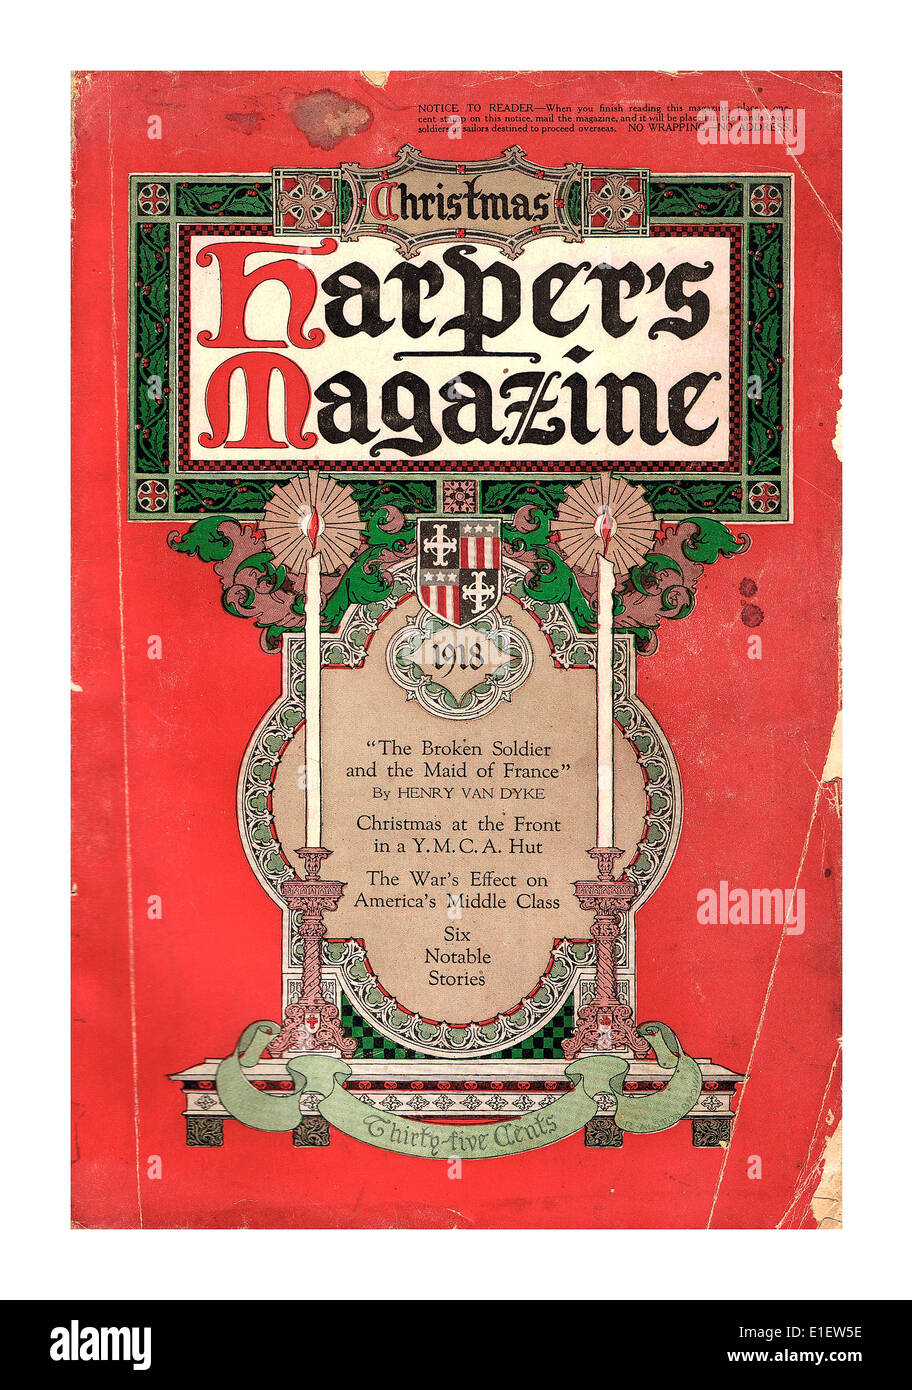 1918 Christmas front cover of Harpers Magazine in sombre wartime mood Stock Photo